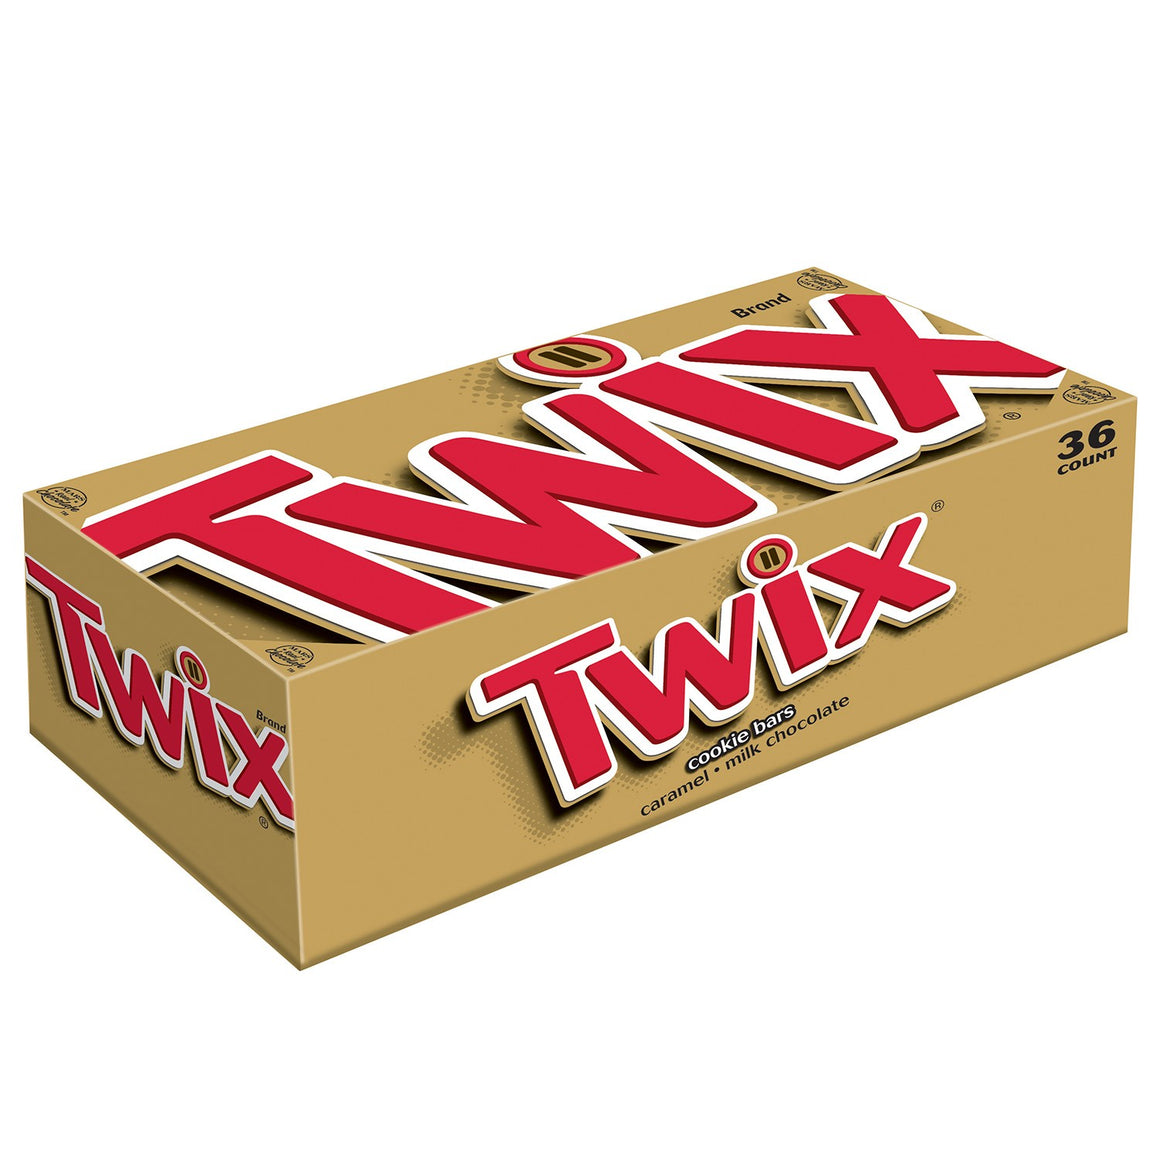 All City Candy Twix Cookie Bar 1.79-oz. 1 Bar Candy Bars Mars Chocolate For fresh candy and great service, visit www.allcitycandy.com